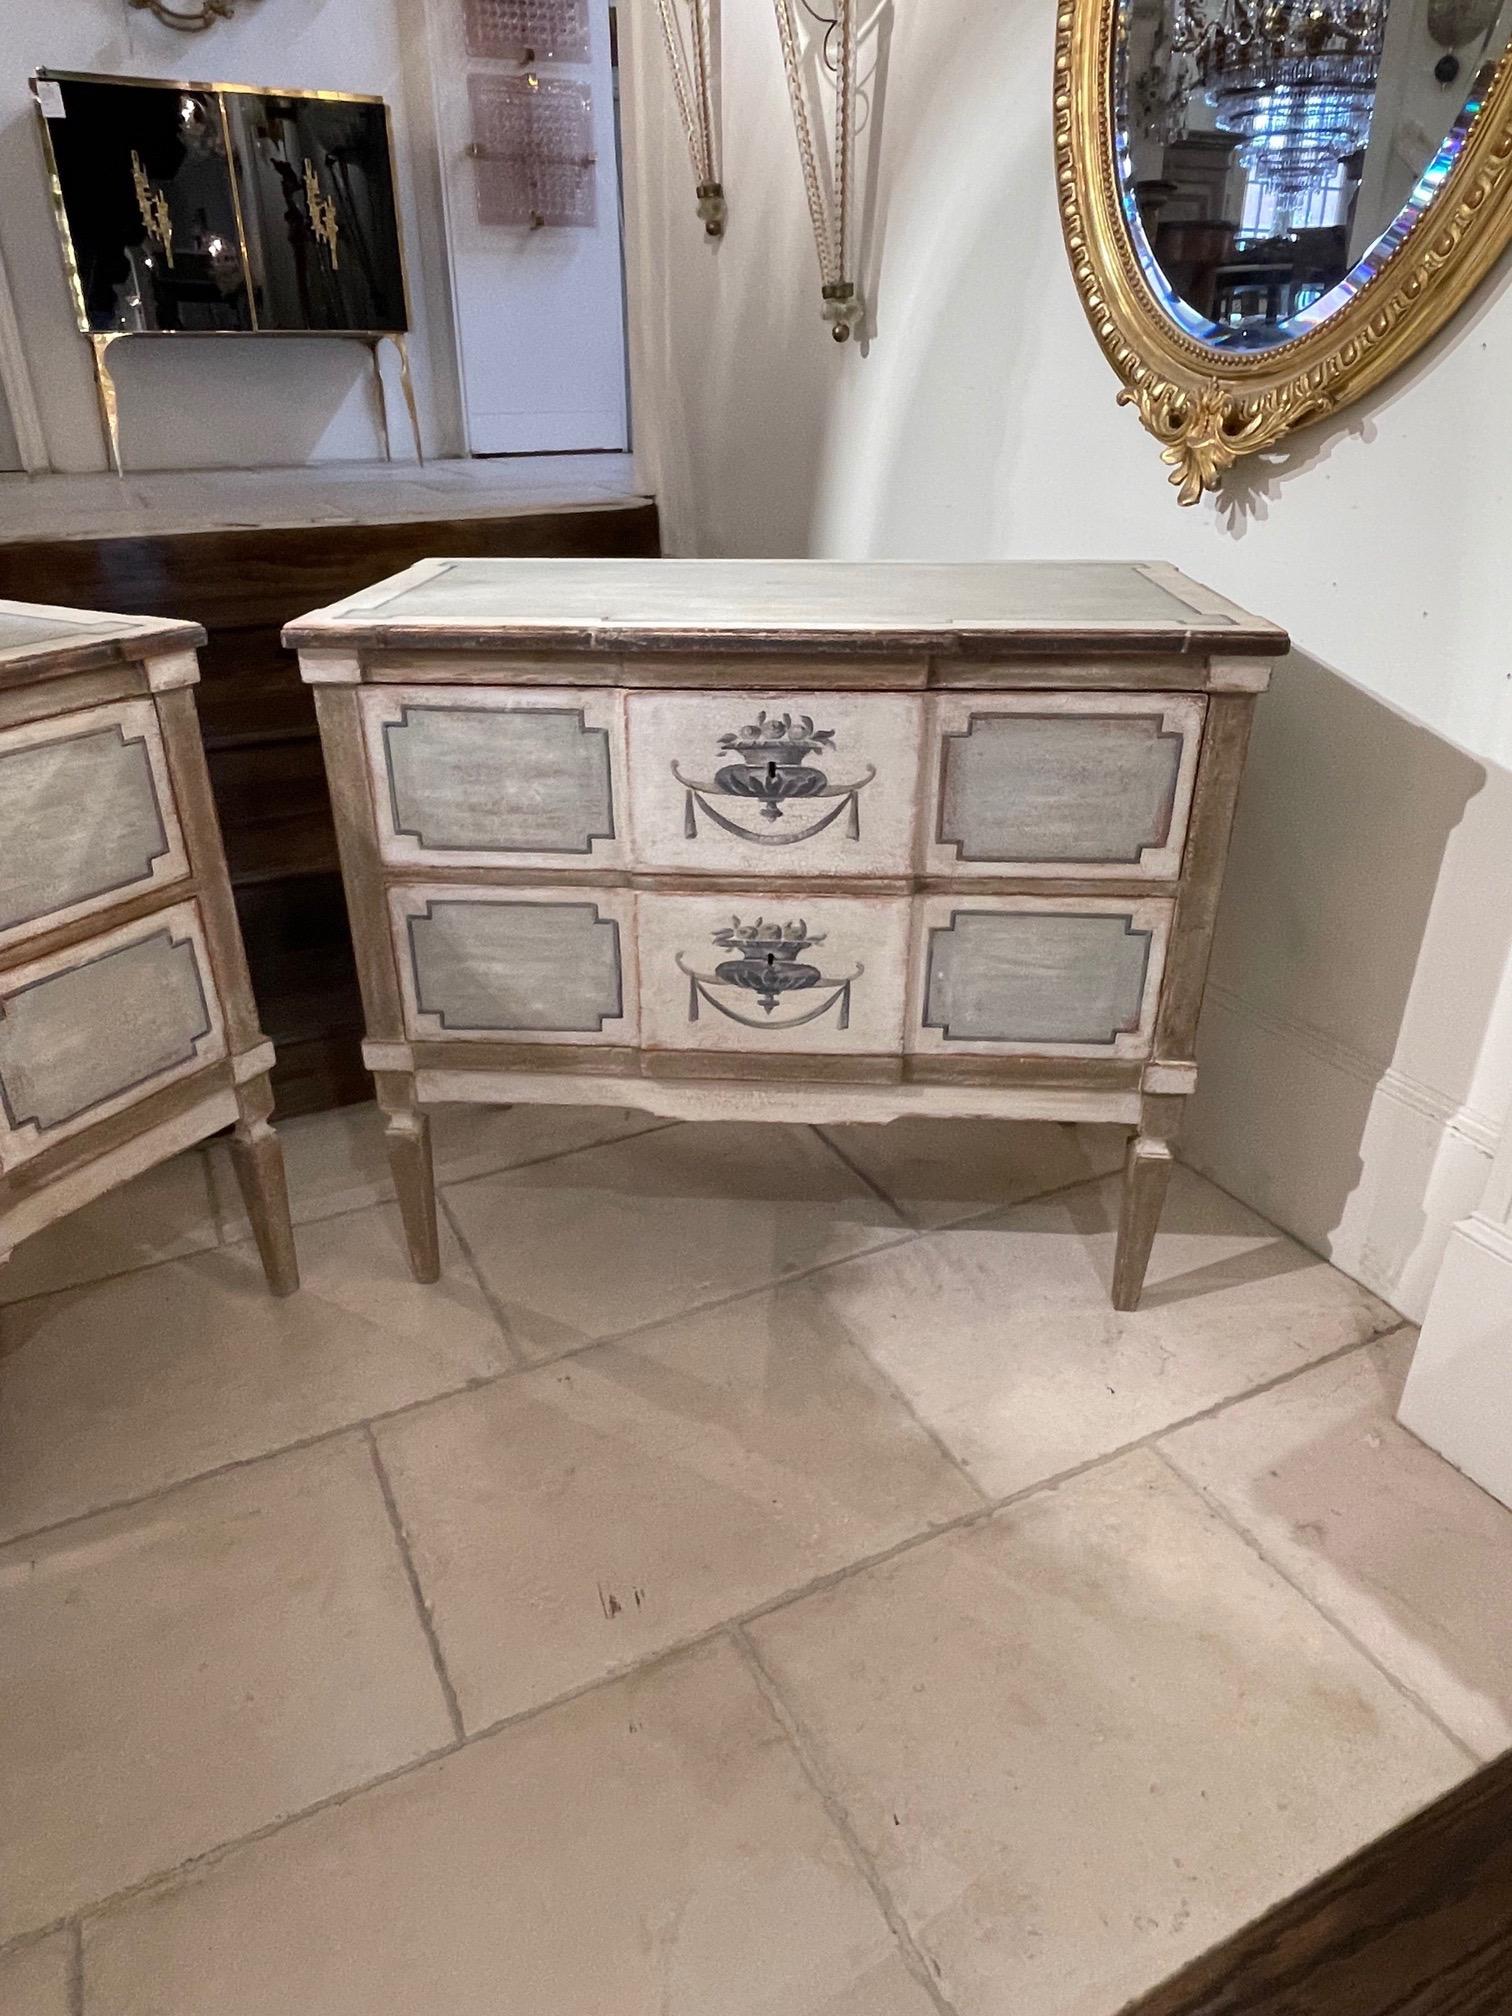 Lovely French Neo Classical style bed side chests. Painted in a pretty creme and green color with an urn and flowers. Simply beautiful!